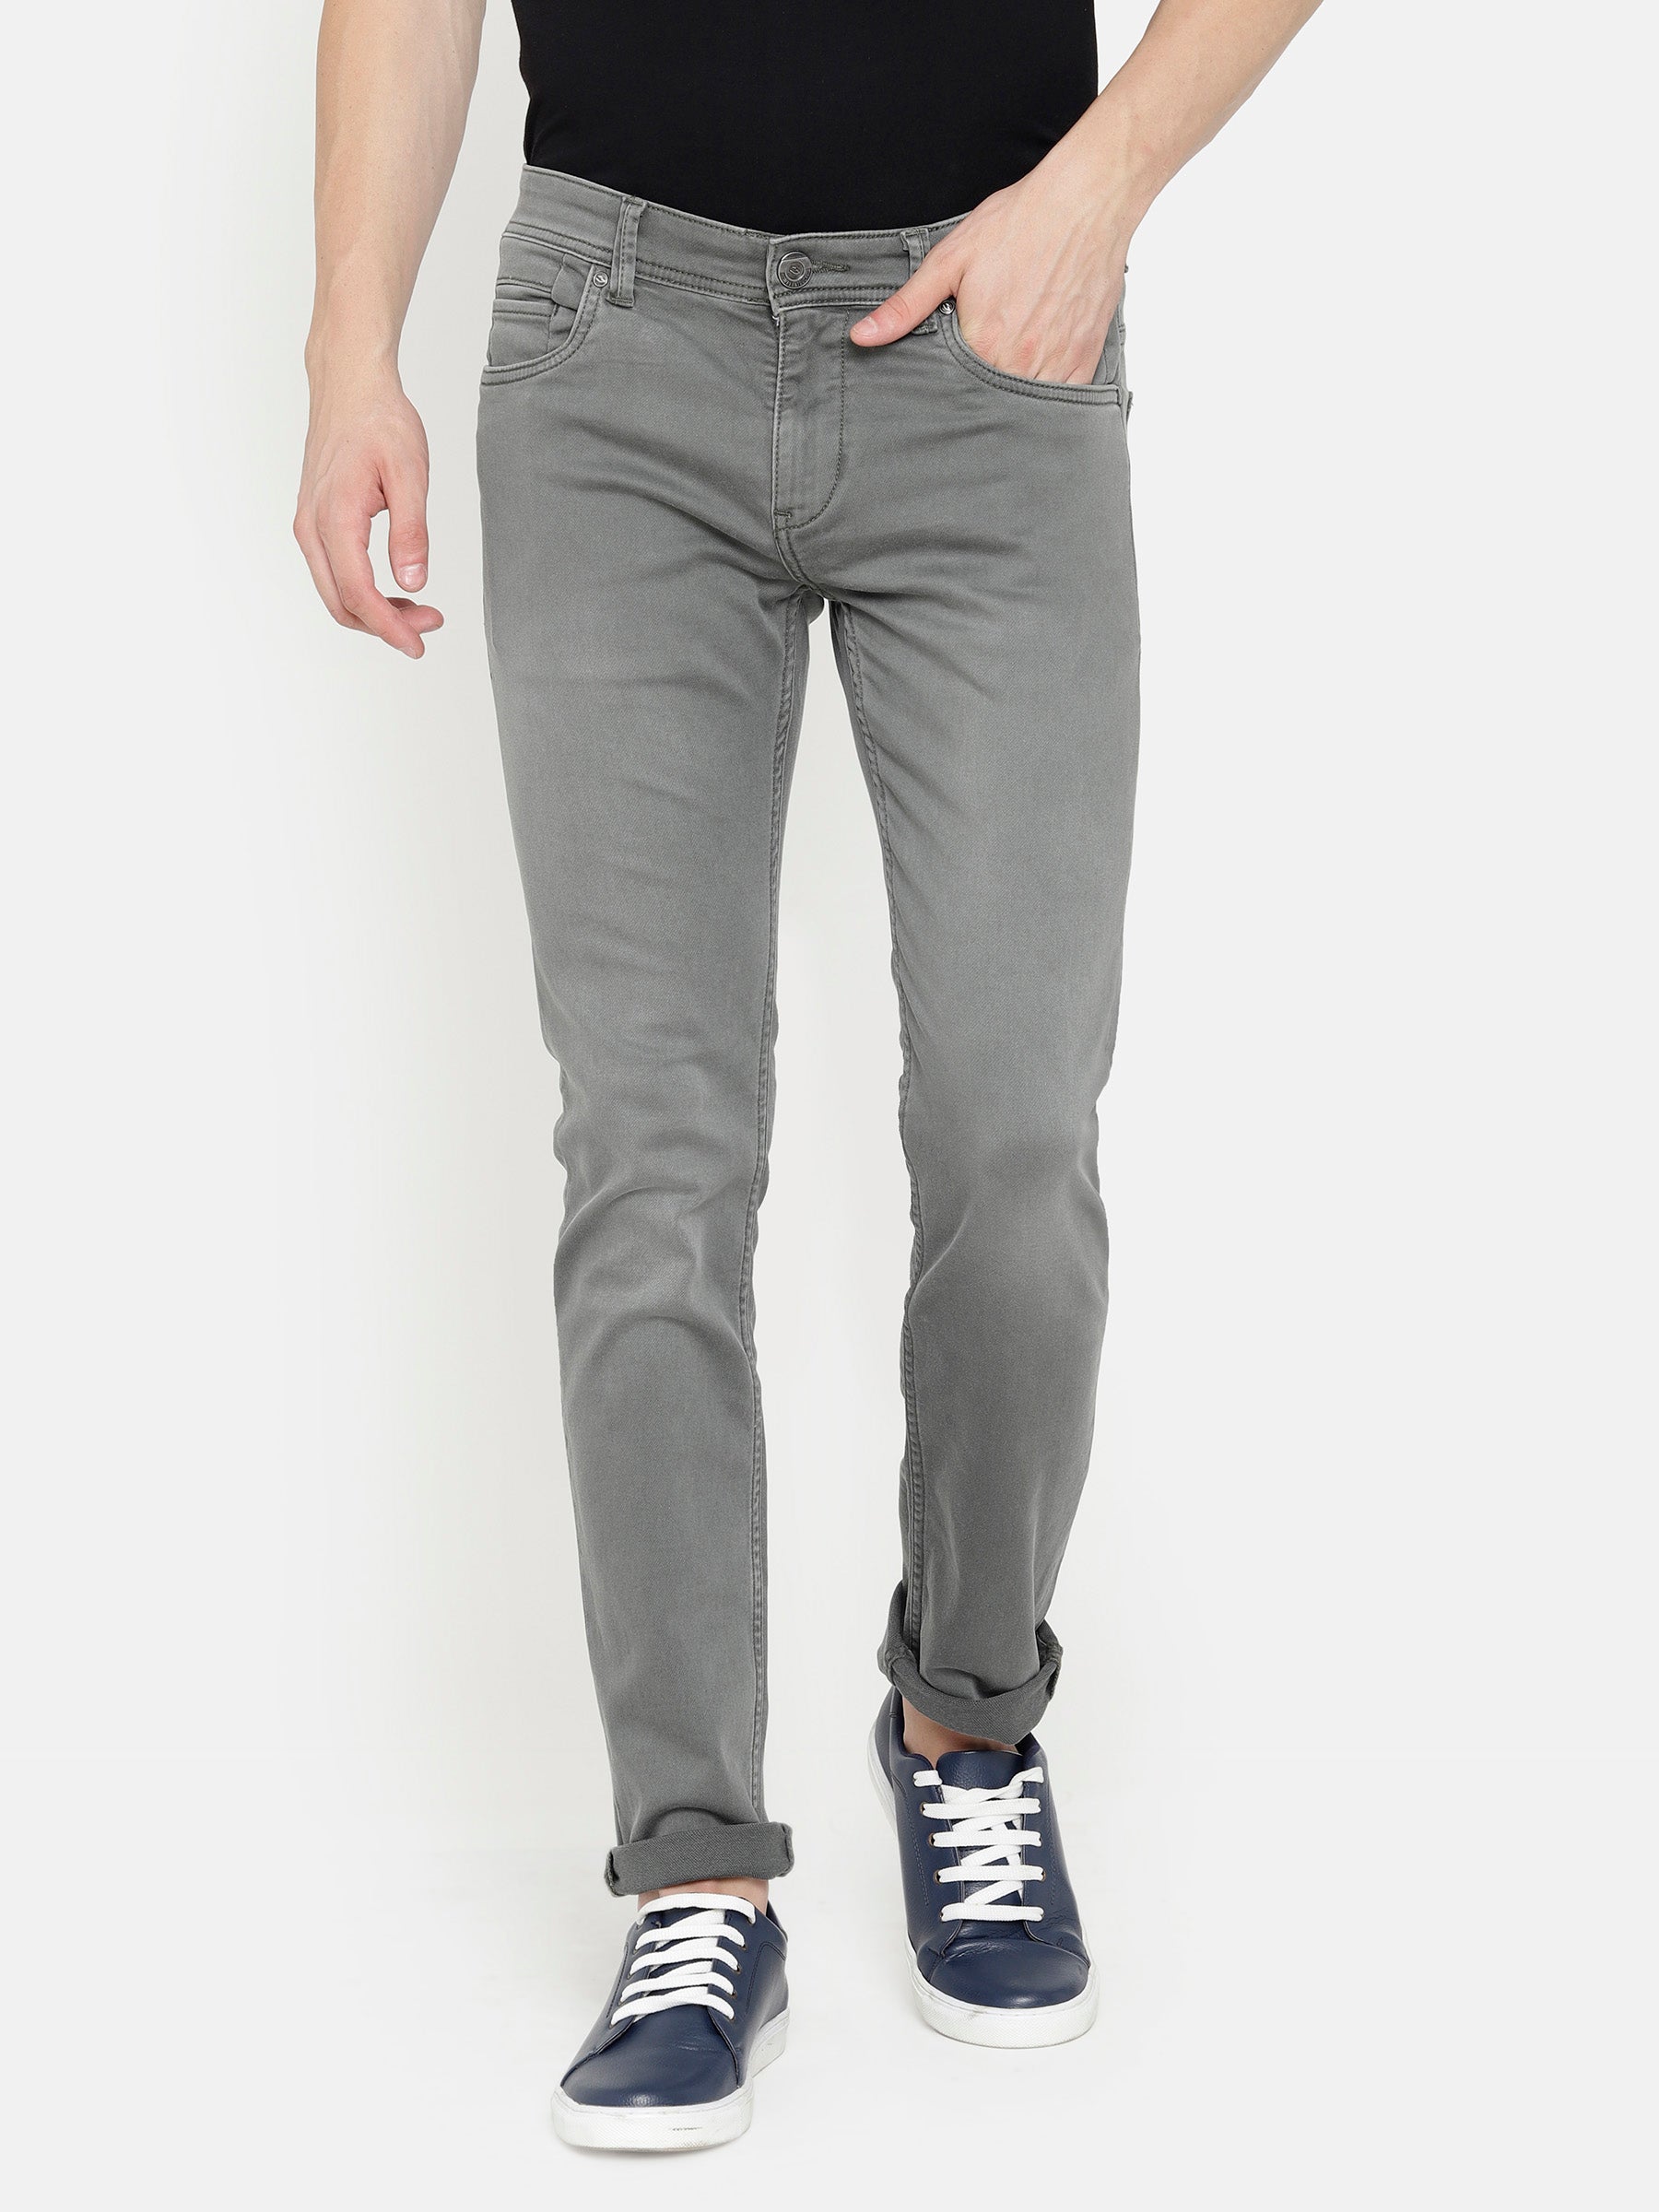 mens fashion shopping Trousers by urbantouch  urban clothing co